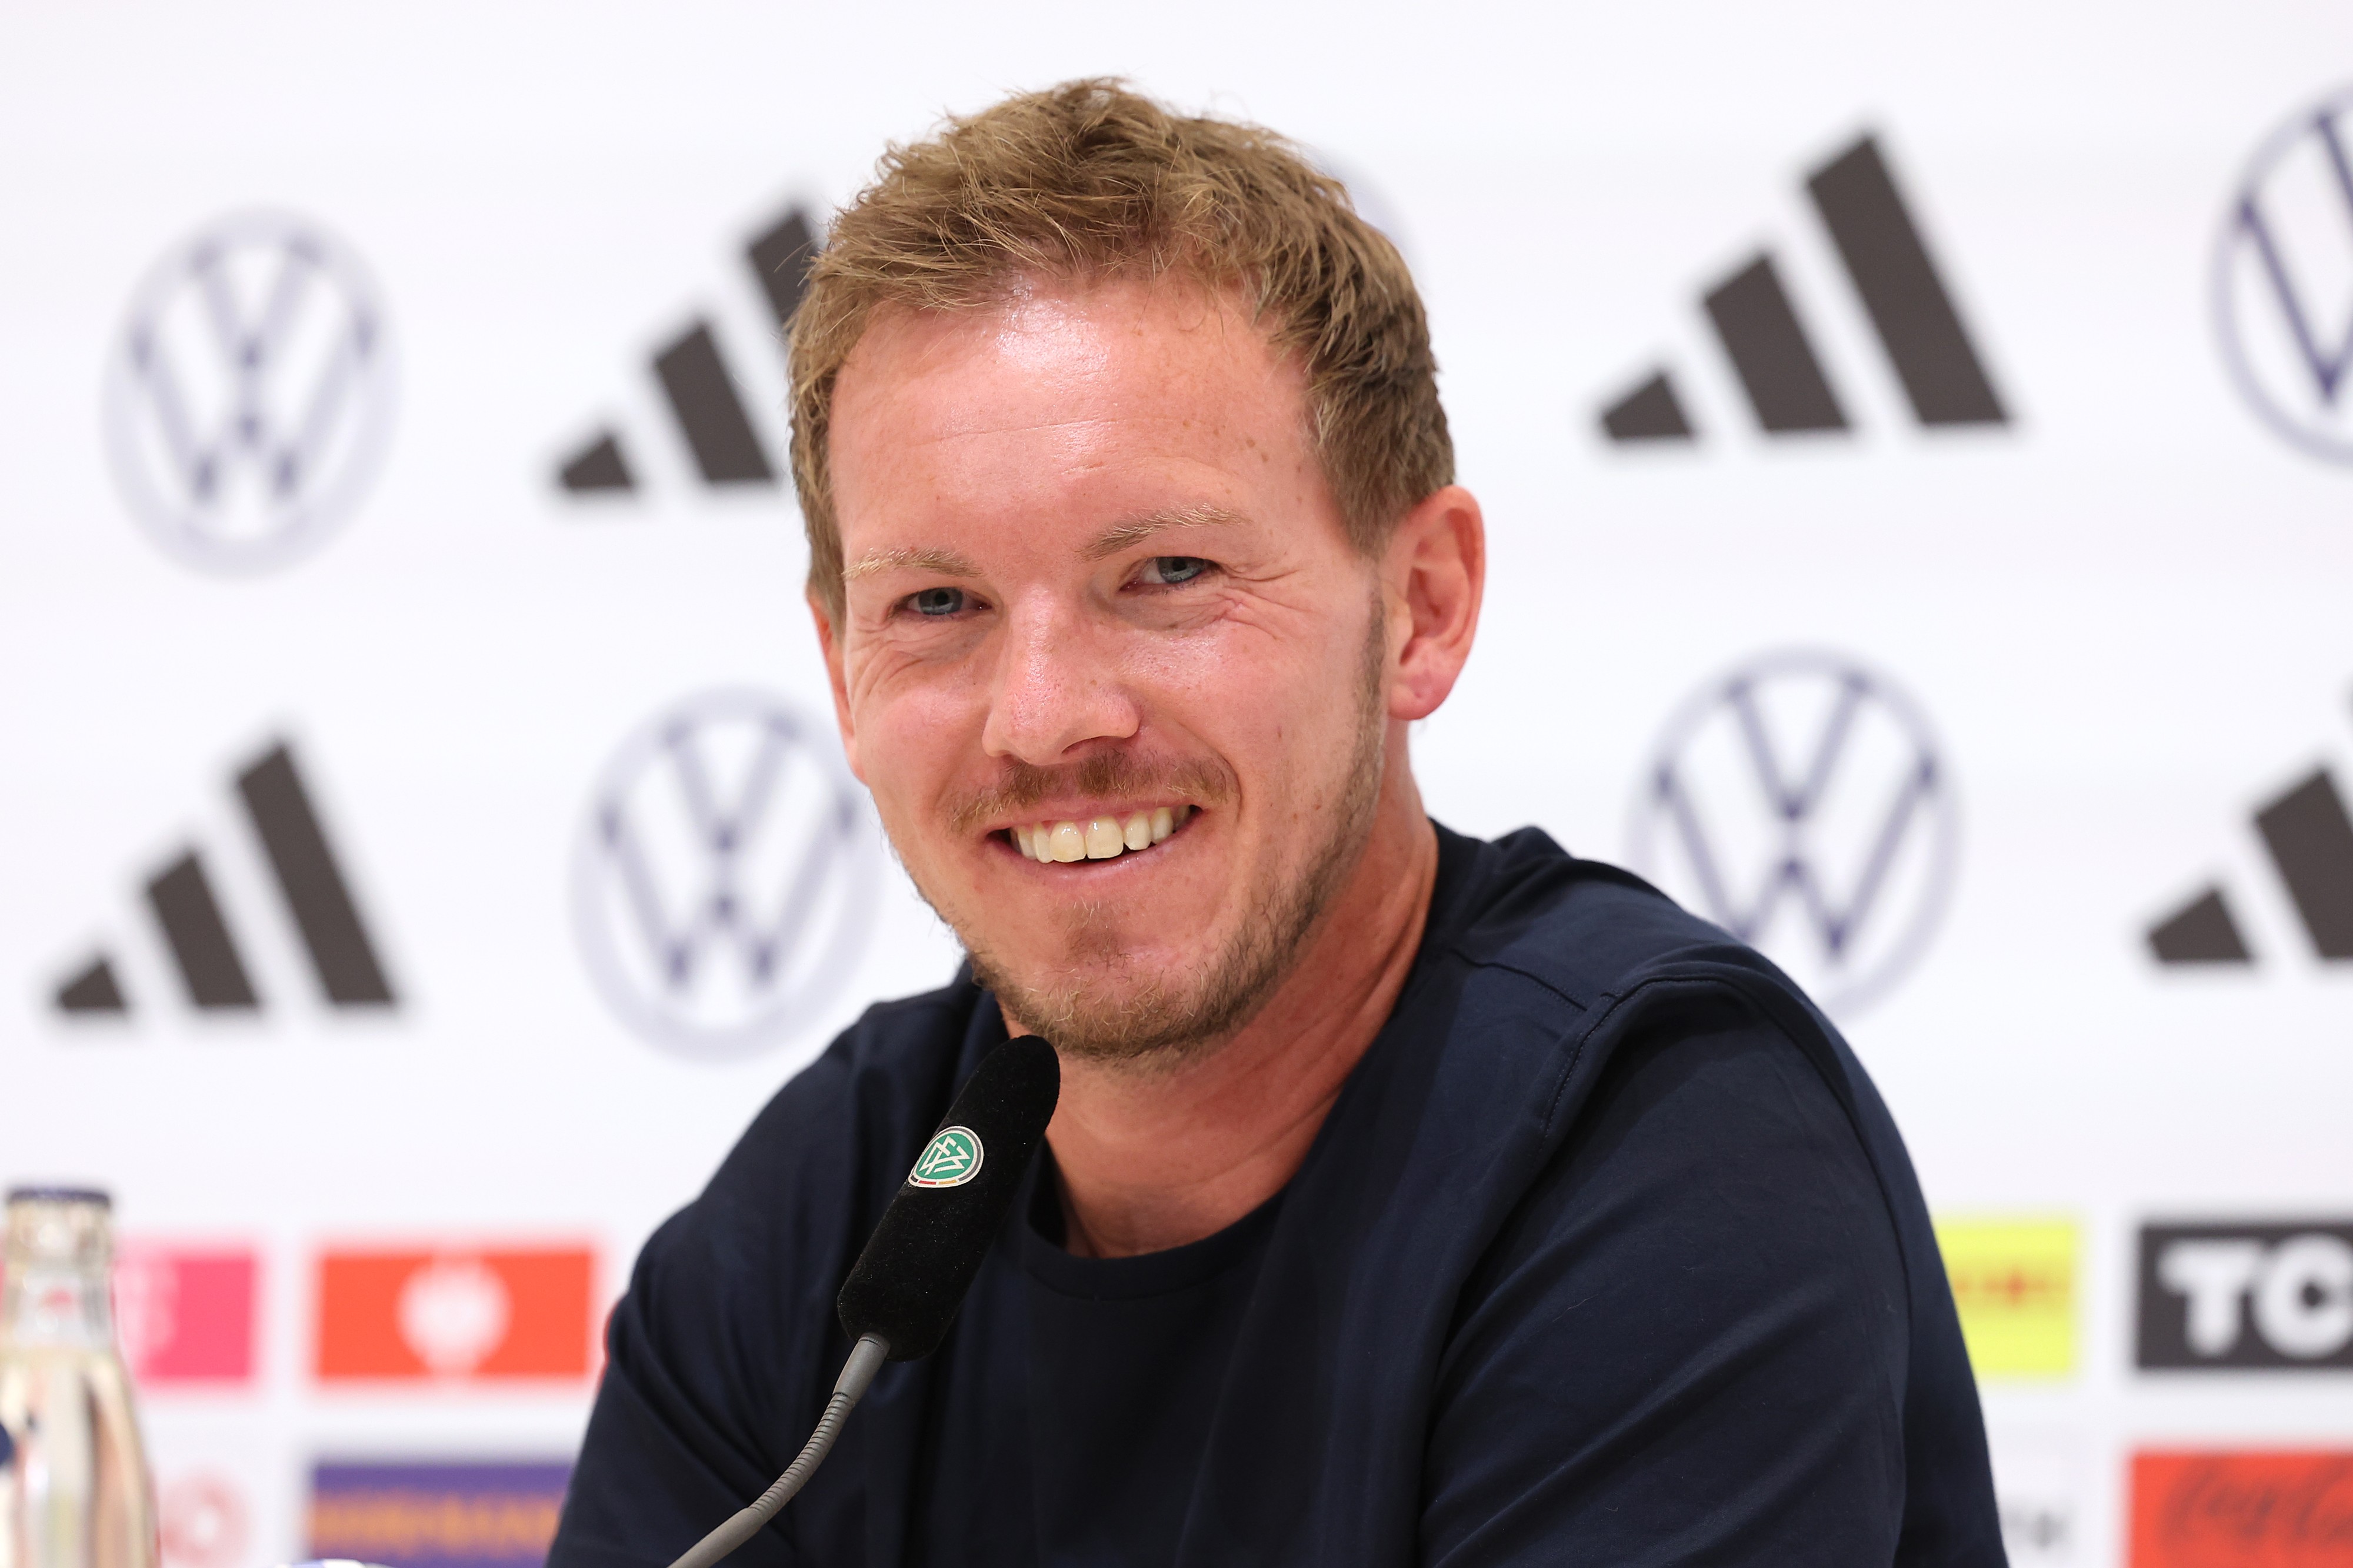 Exclusive: Nagelsmann likely to be a Premier League manager in two years